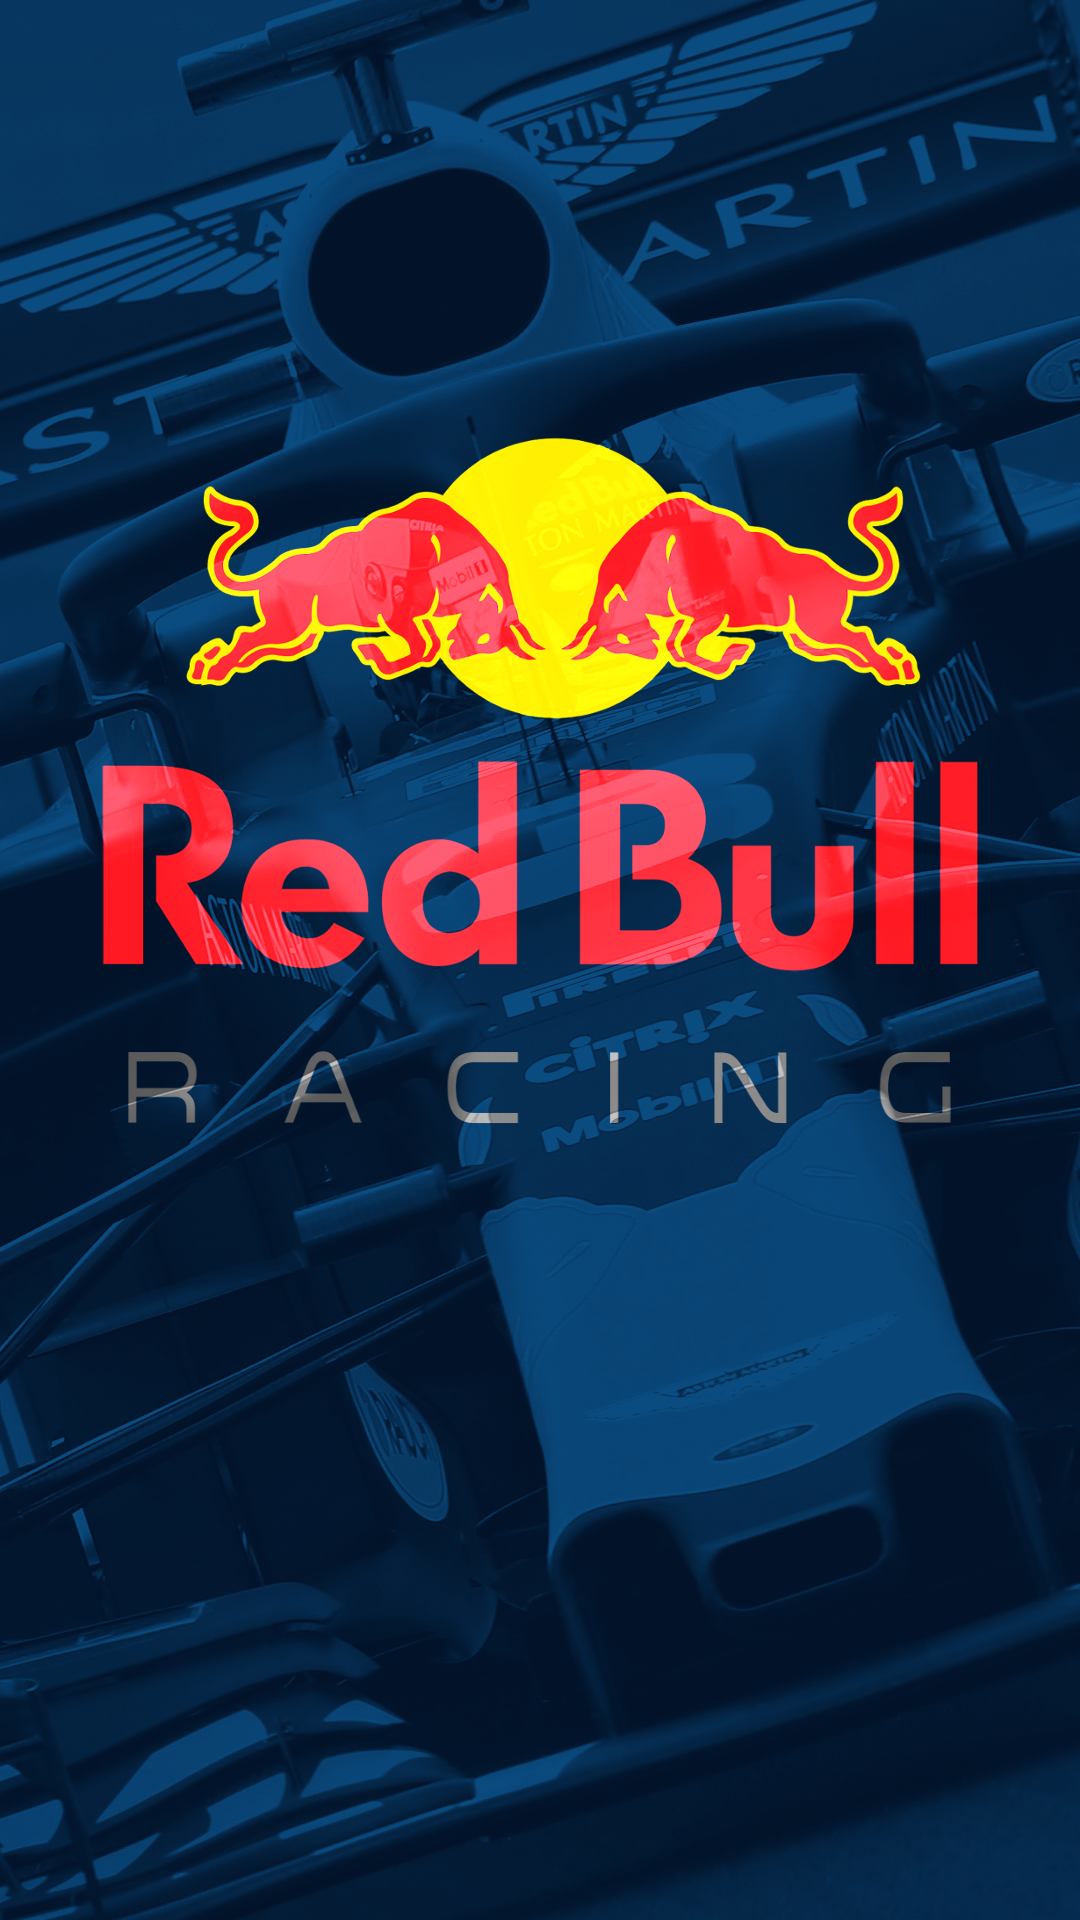 Here's a Red Bull Racing Wallpaper that I made [1080x1920]